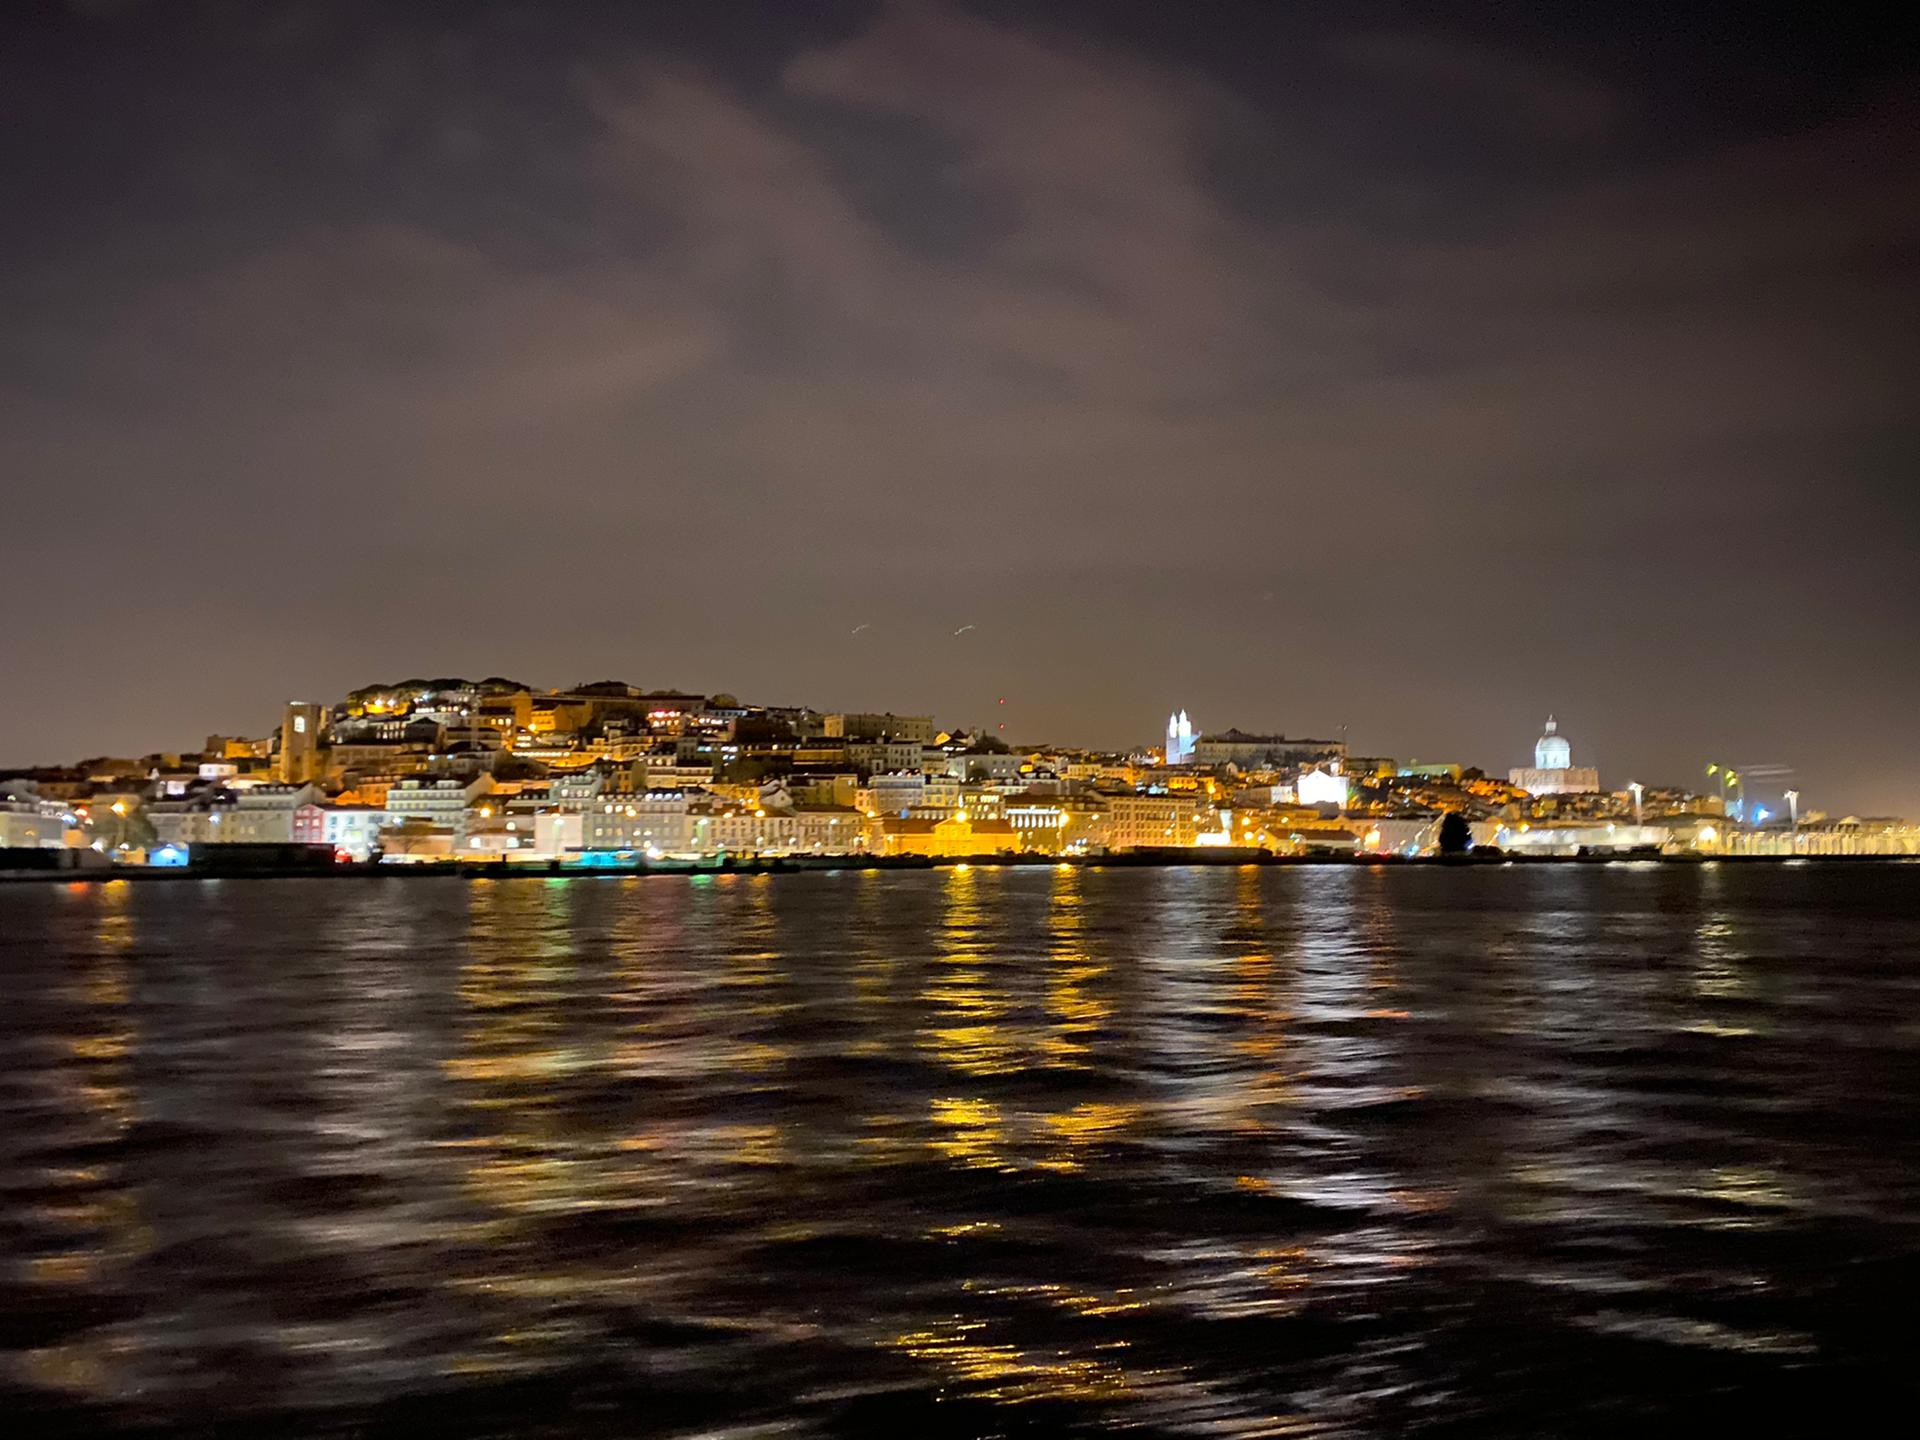 Lisbon's hills by night from the River